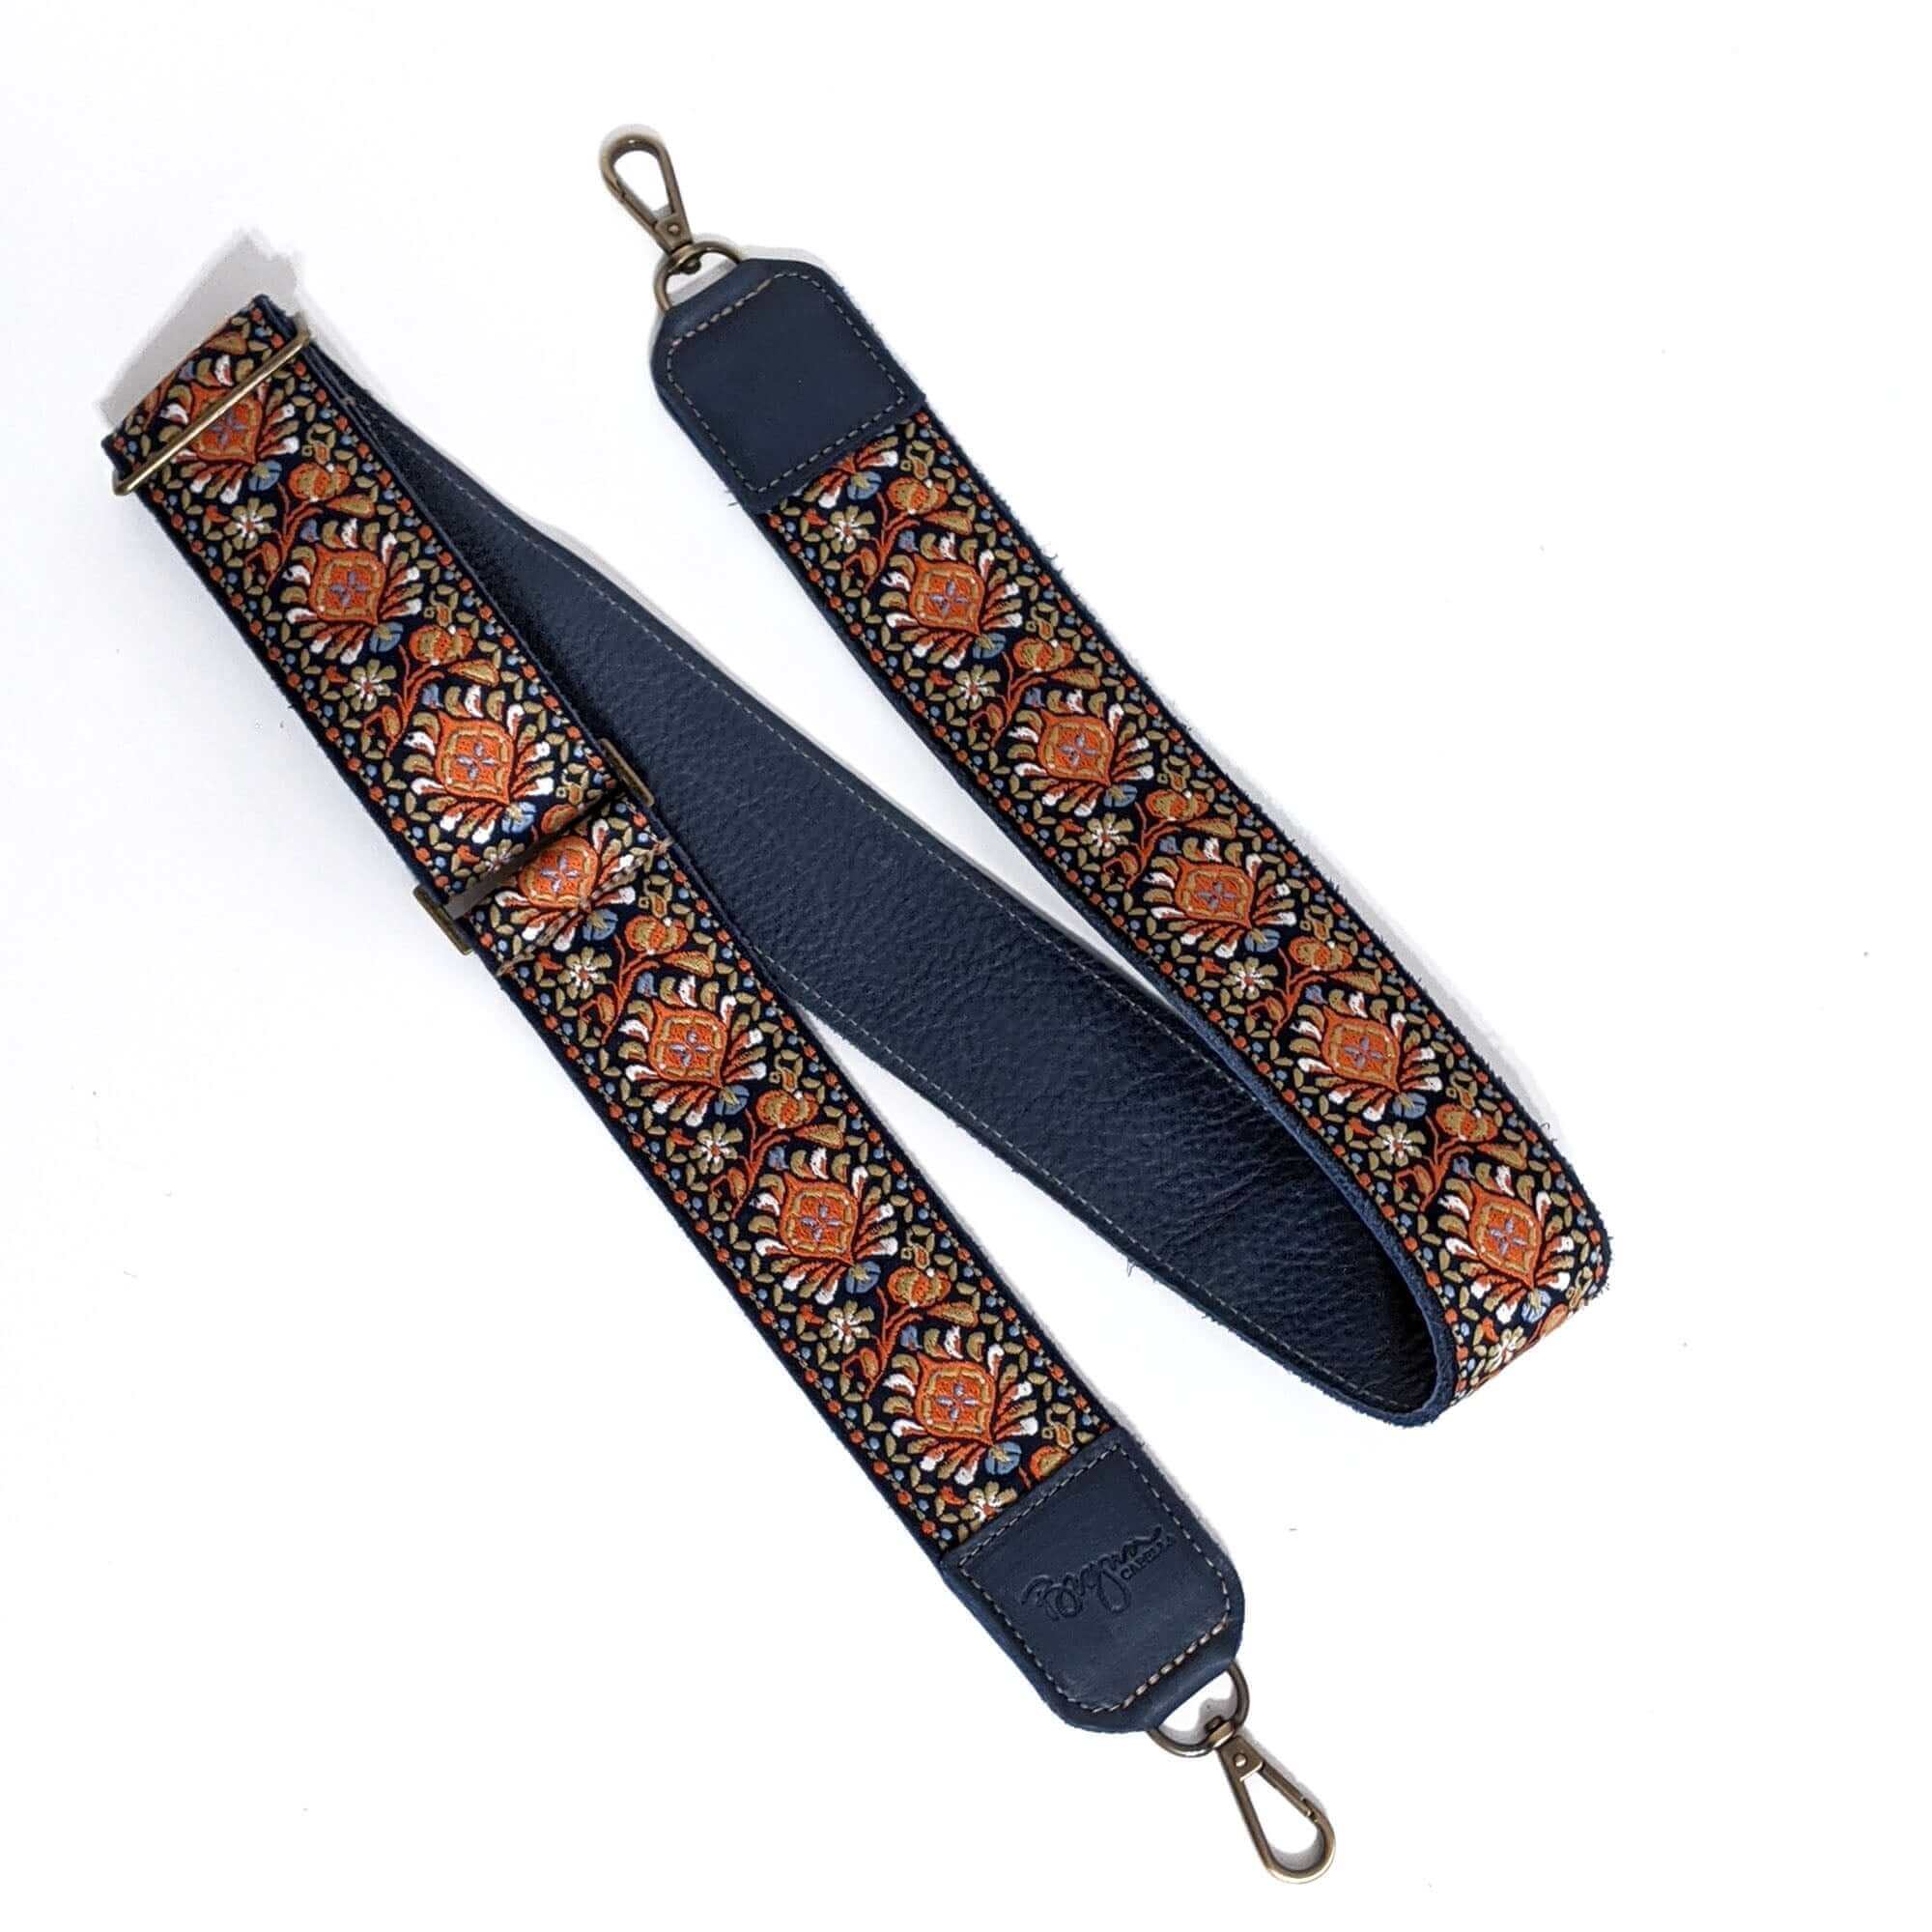 Guitar-style Straps, Replacement Purse Straps & Handbag Accessories -  Leather, Chain & more